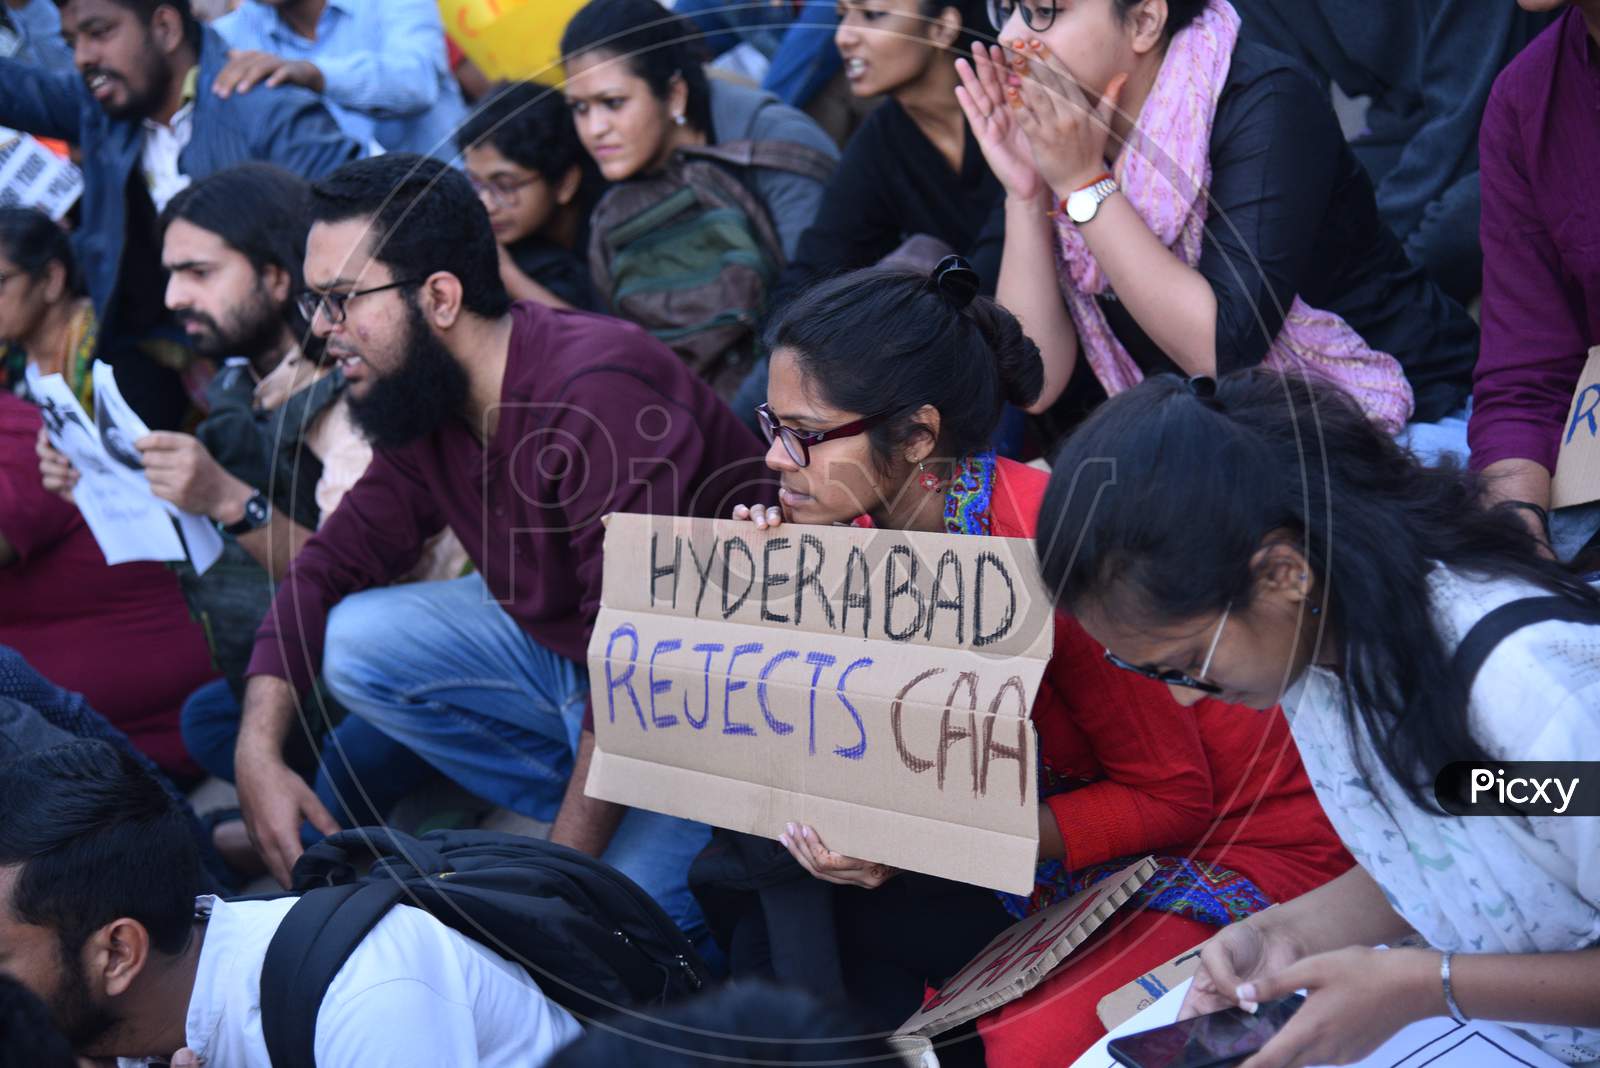 A woman protester holds a placard with 'Hyderabad rejects CAA' slogan written